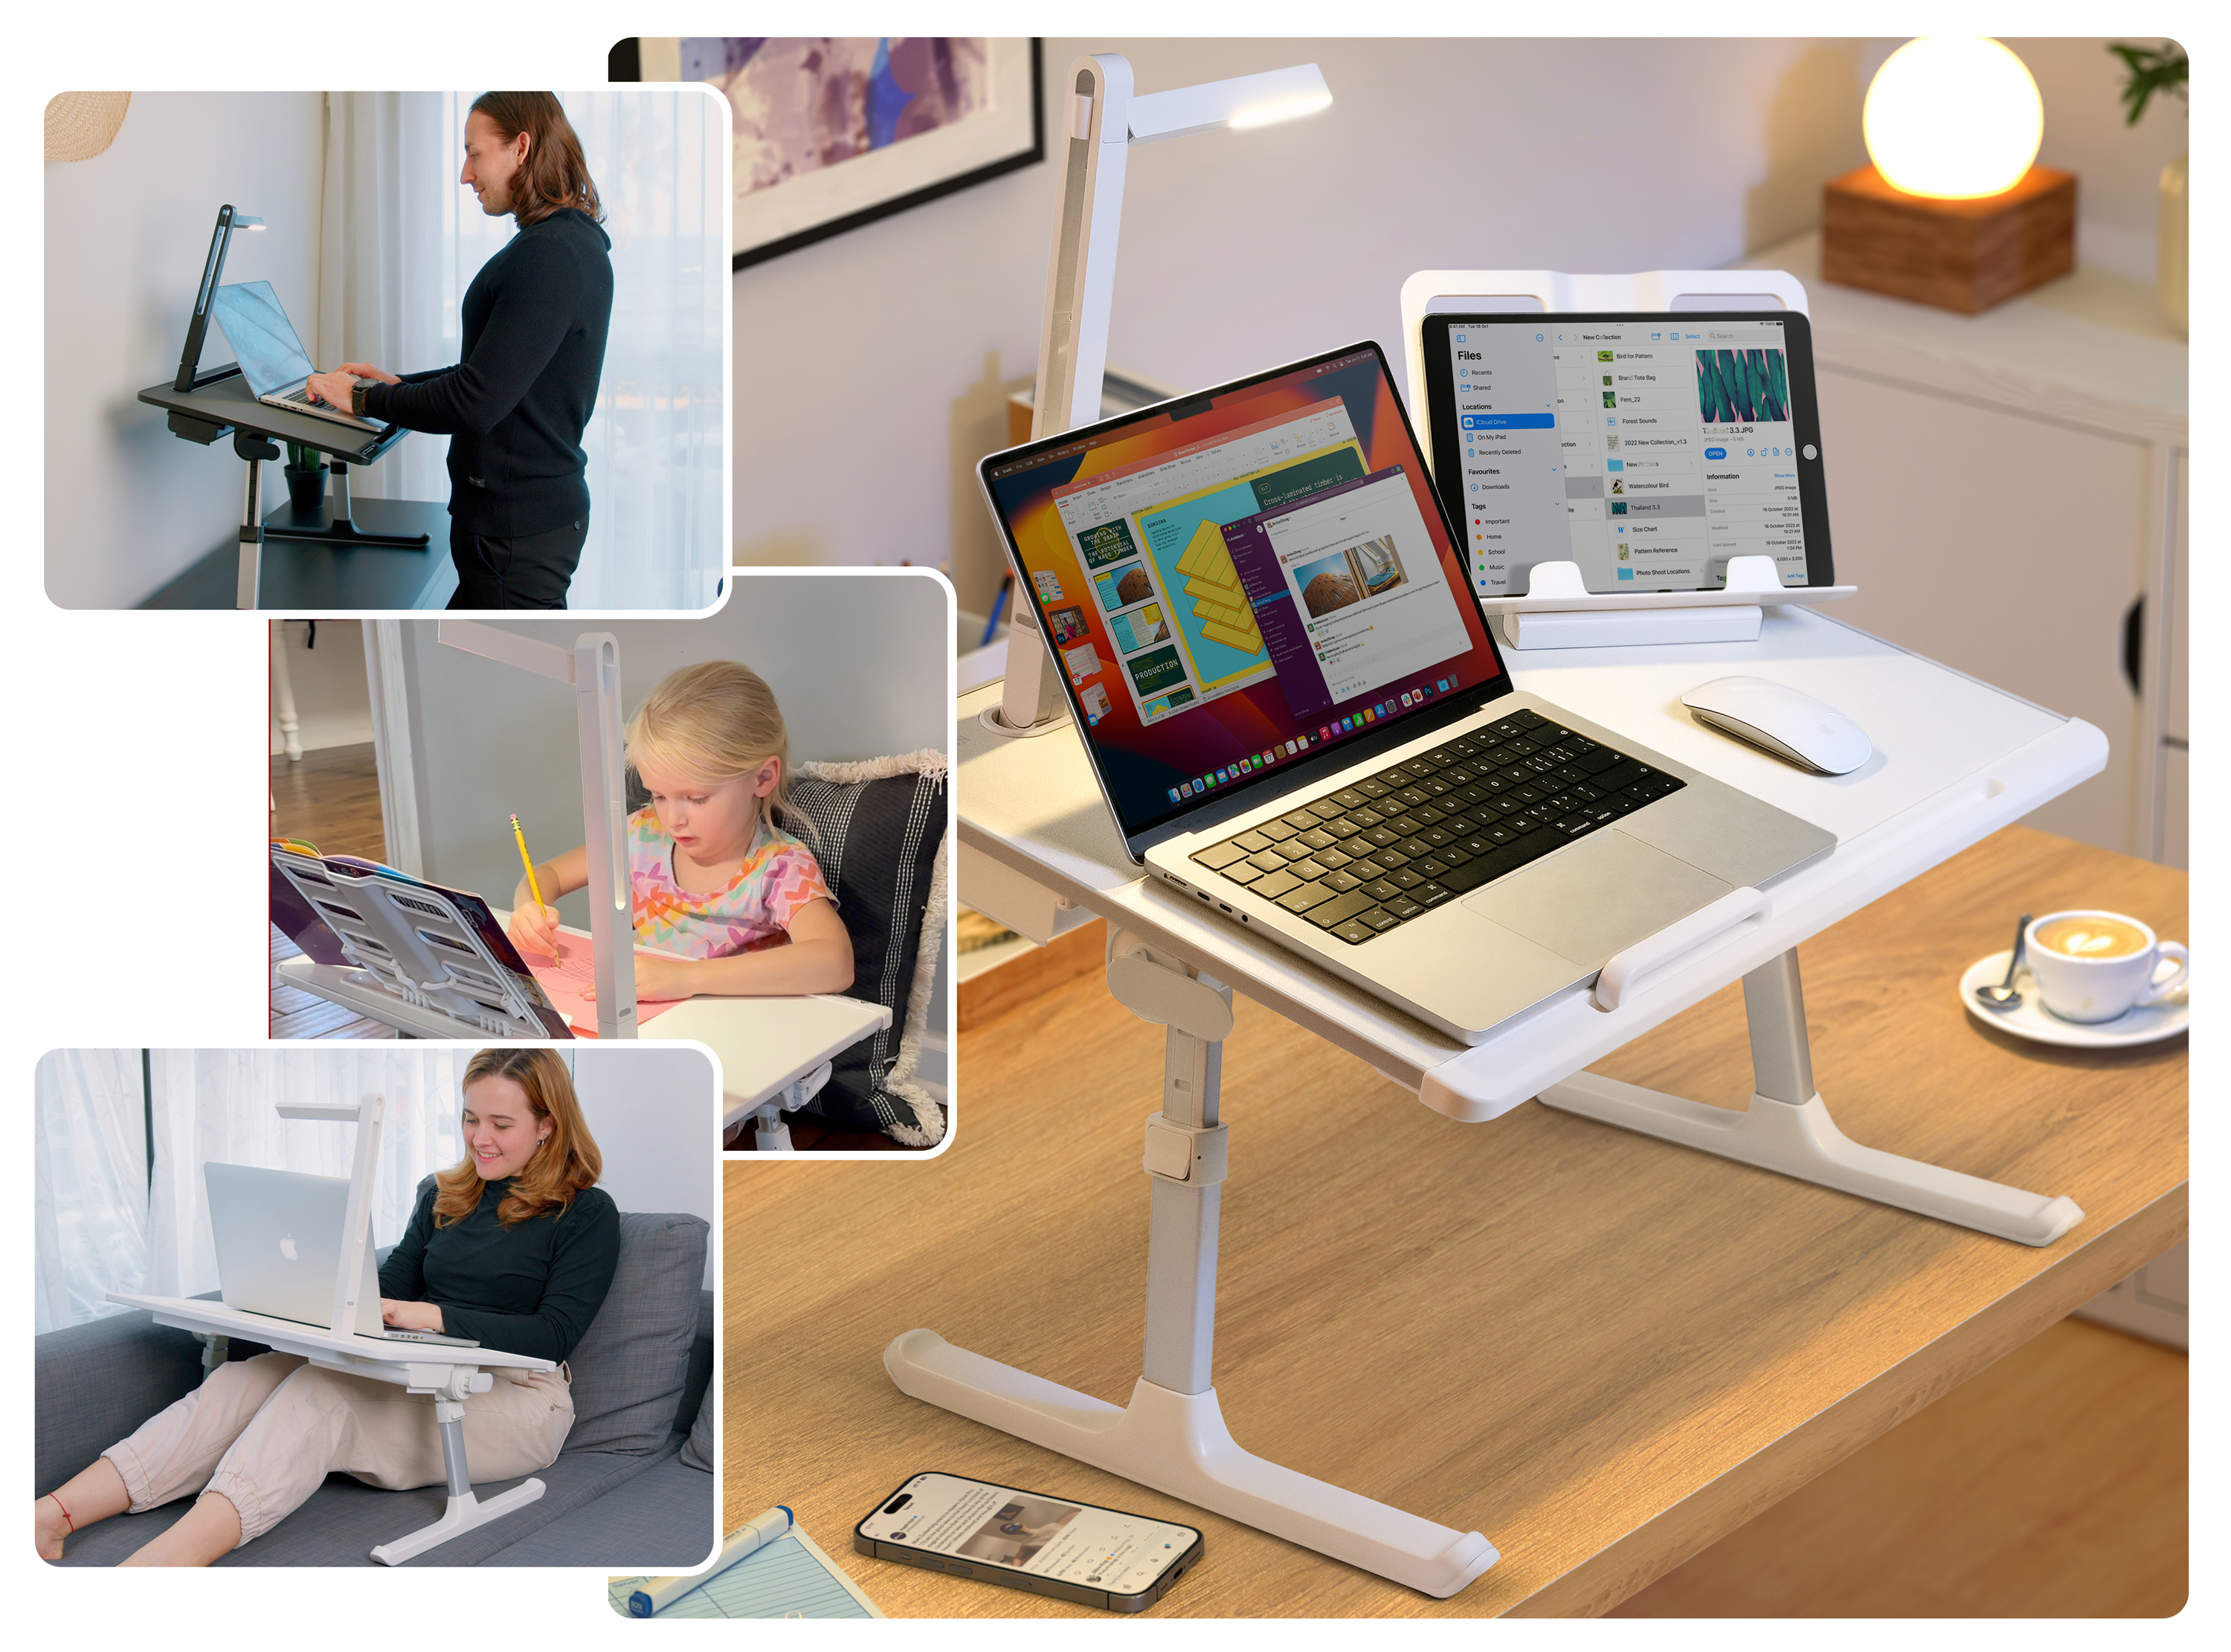 Portable Lap Desk  Buy Online - Free Fast Shipping